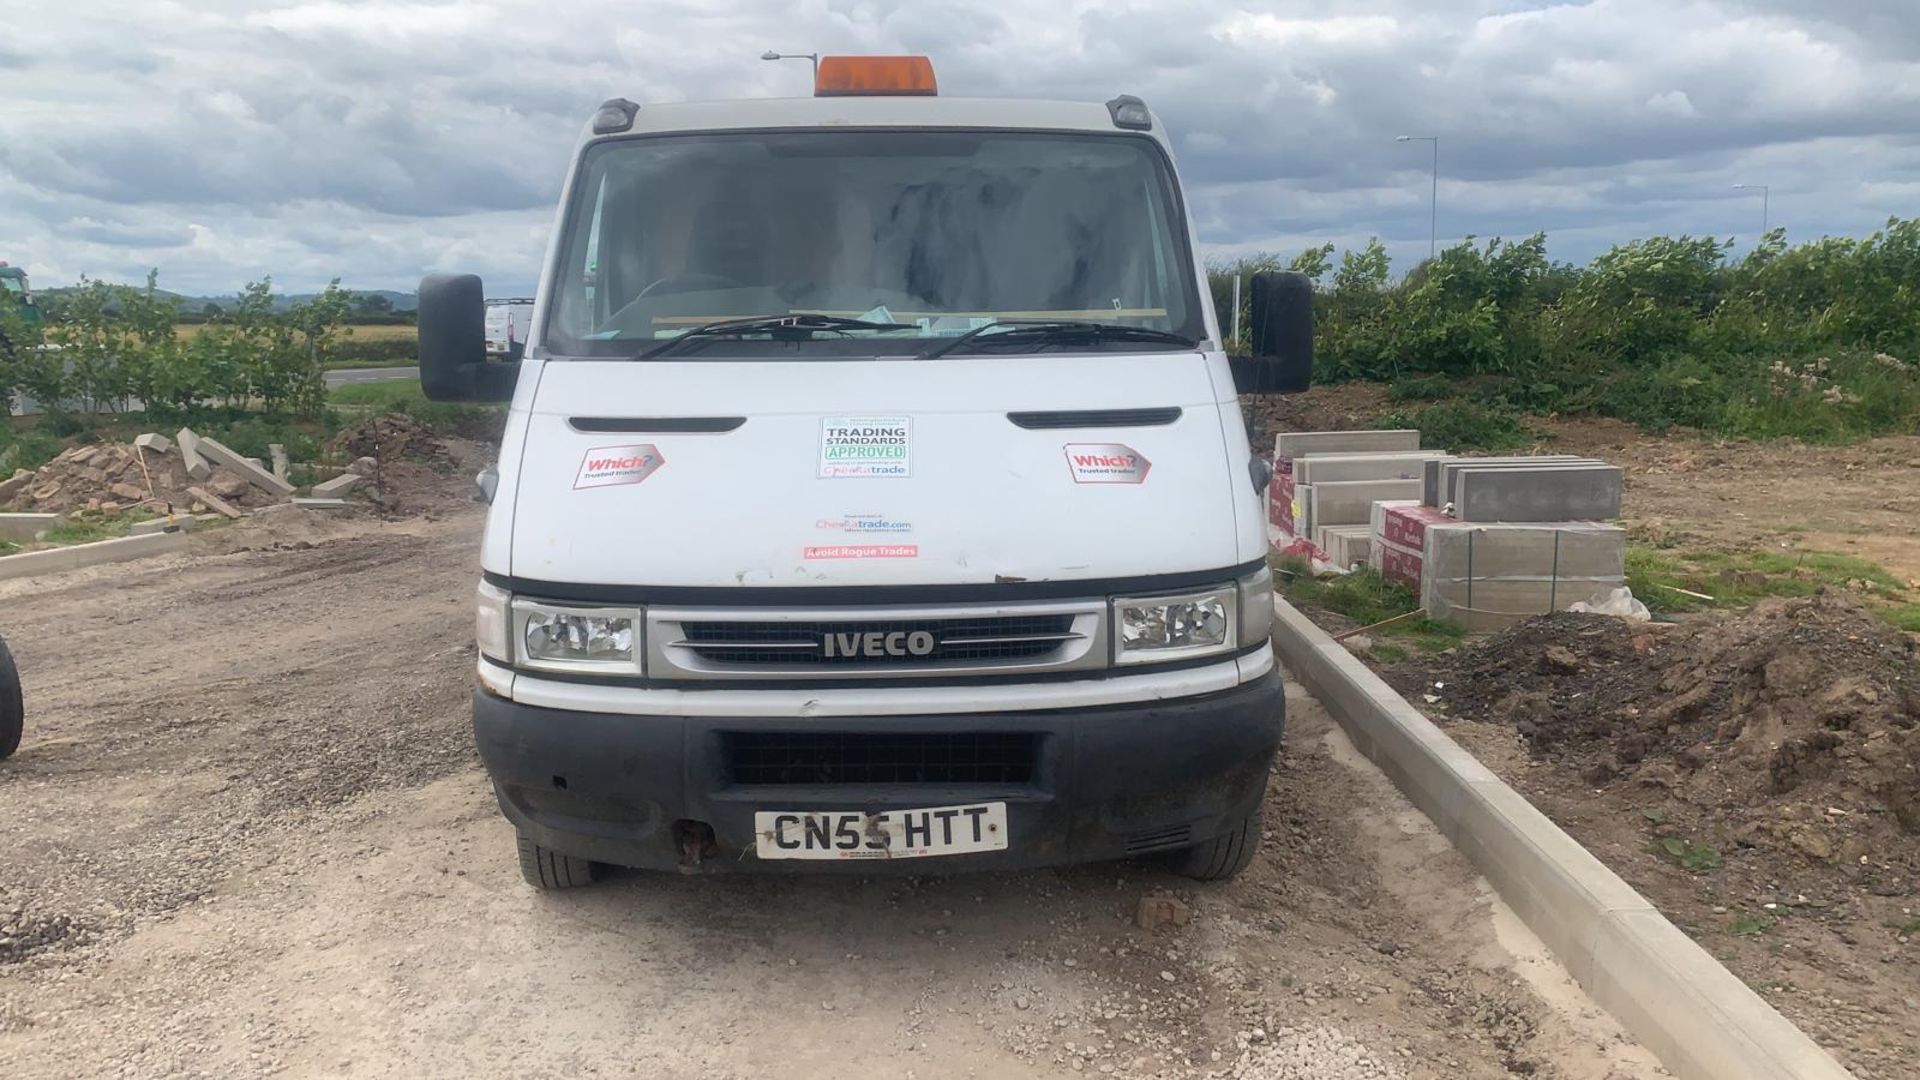 2005/55 REG IVECO DAILY 35C12 LWB 2.3 DIESEL WHITE TIPPER, SHOWING 1 FORMER KEEPER *NO VAT* - Image 2 of 4